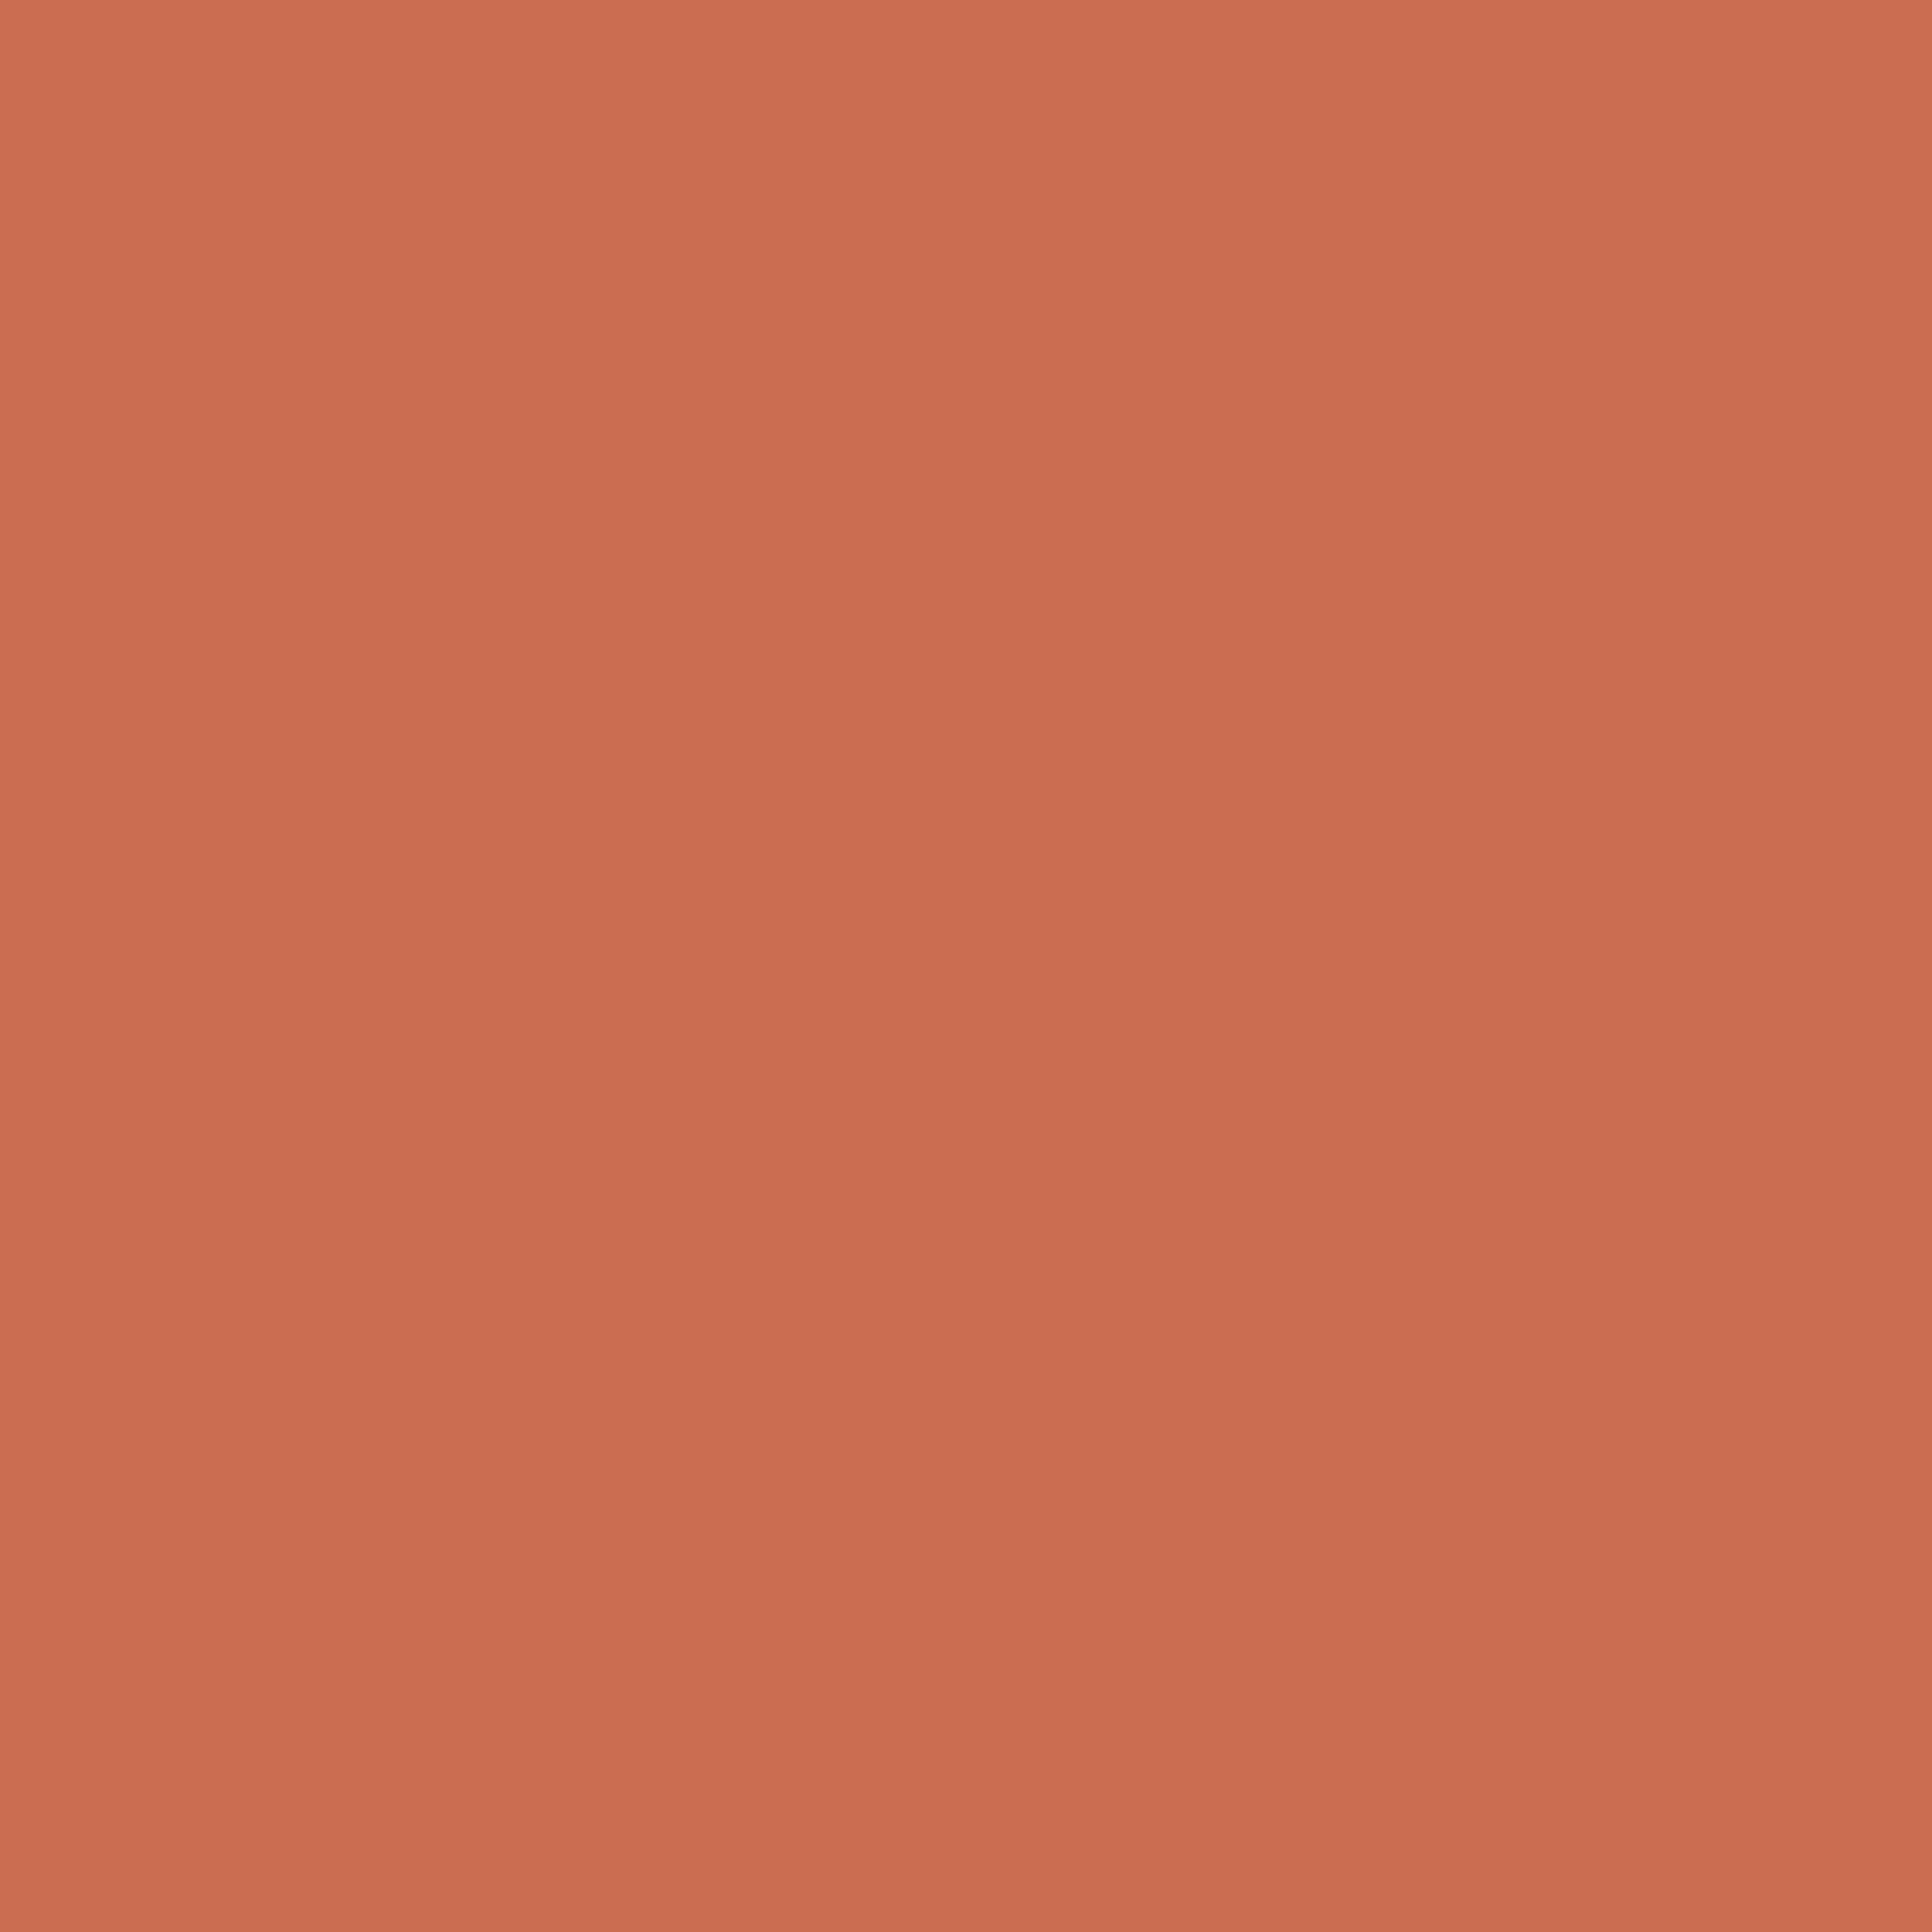 3600x3600 Copper Red Solid Color Background